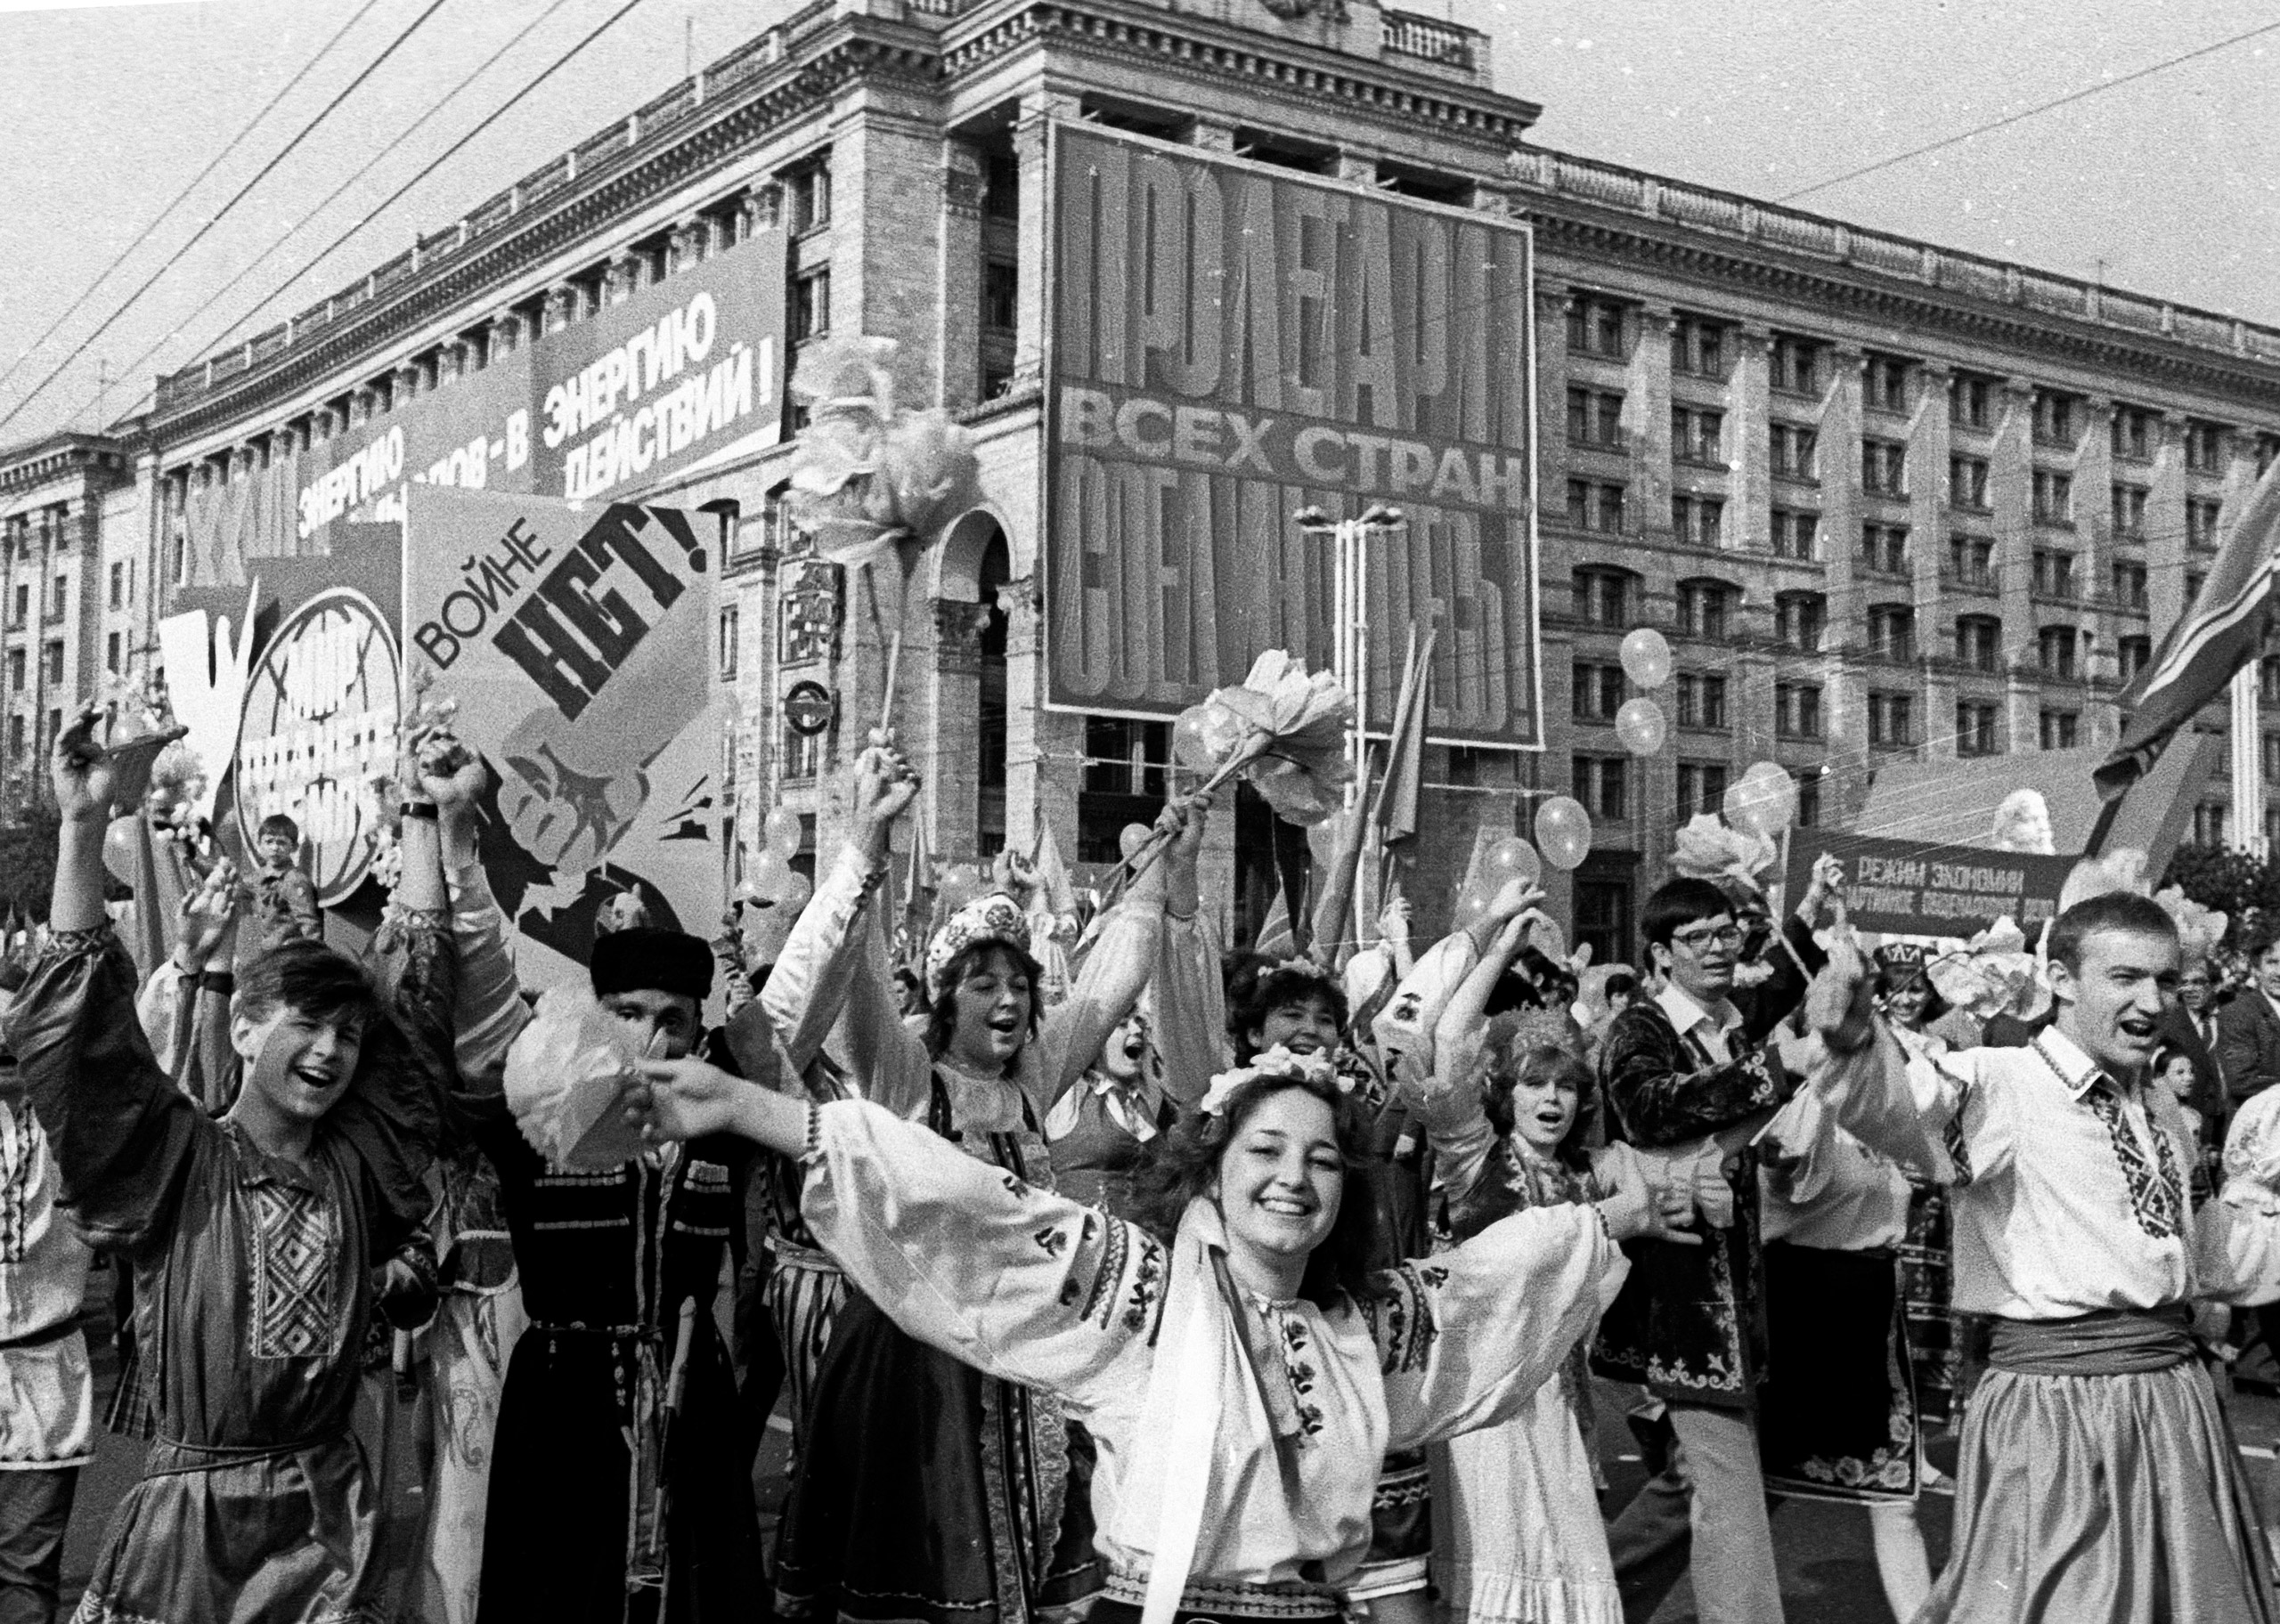 A few days after the deadly explosion on the 4th unit in Chernobyl nuclear power plant, people rallied to celebrate the International Workers' Day in Kiev, Ukraine, on May 1, 1986. Nobody cancelled the May Day parade in Kiev when thousands of people walked in columns along the streets, with songs, flowers and Soviet leaders portraits, covered with invisible clouds of fatal radiation. (AP)